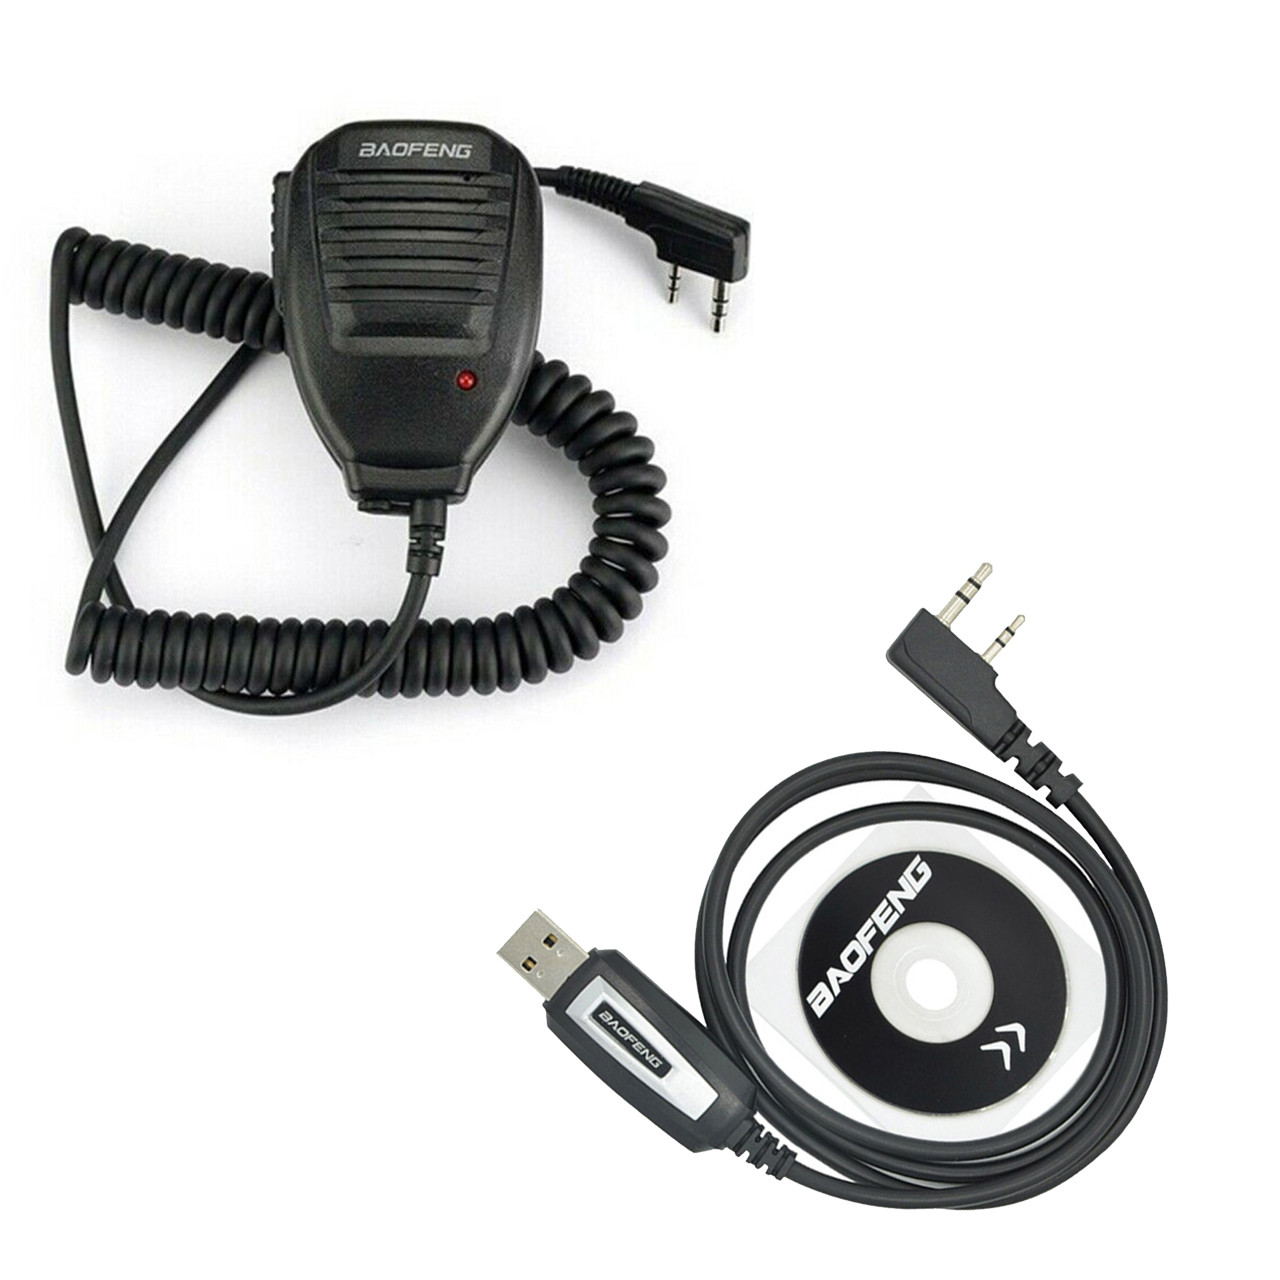 BAOFENG BF-88A Walkie Talkies 6 Way Charger Bulk FRS Radio License-Free  Long Range 16 Channels Two Way Radio Pack of 6